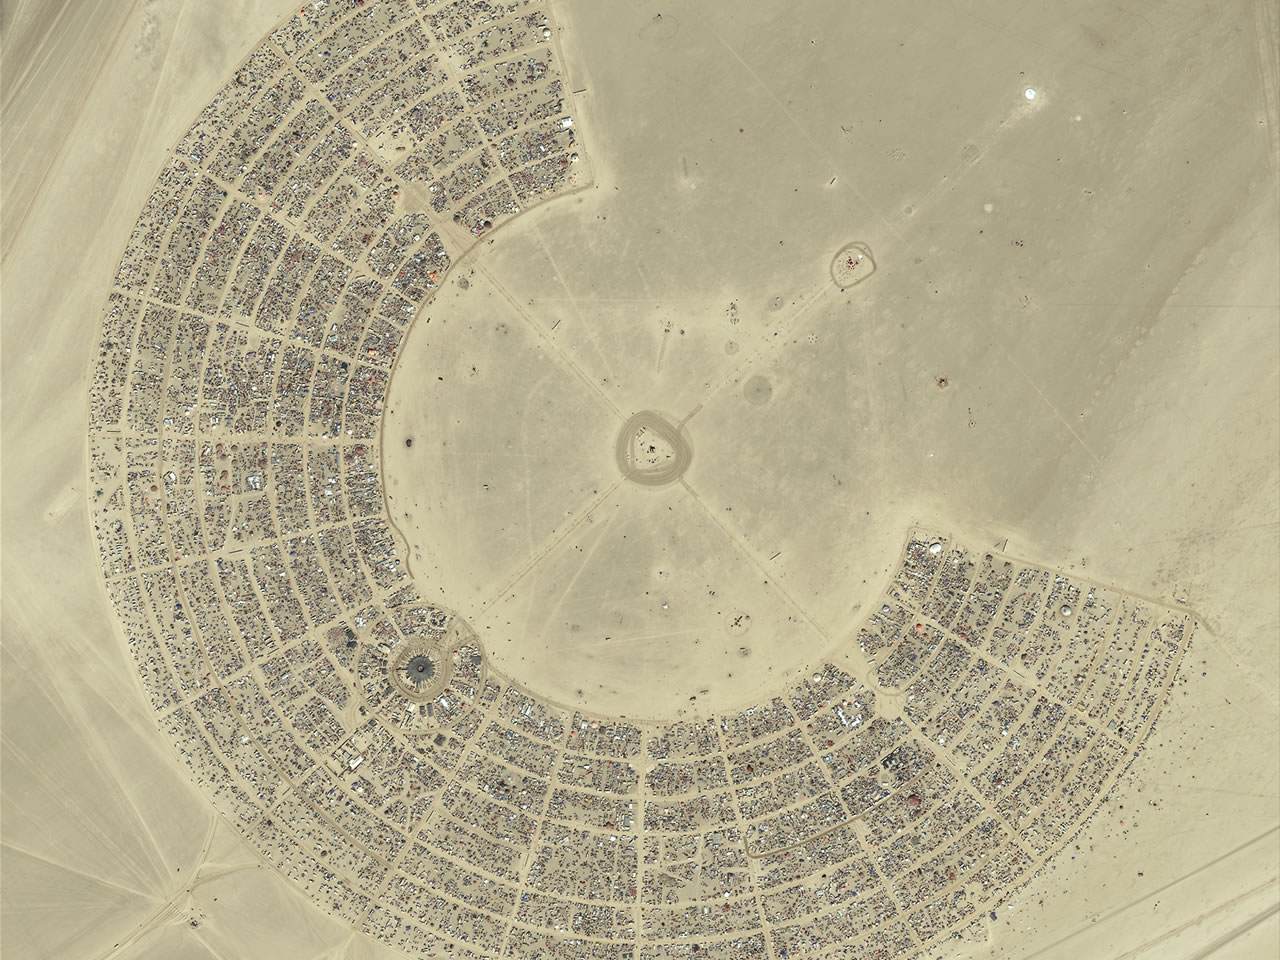 burning man, photography, aerial, town